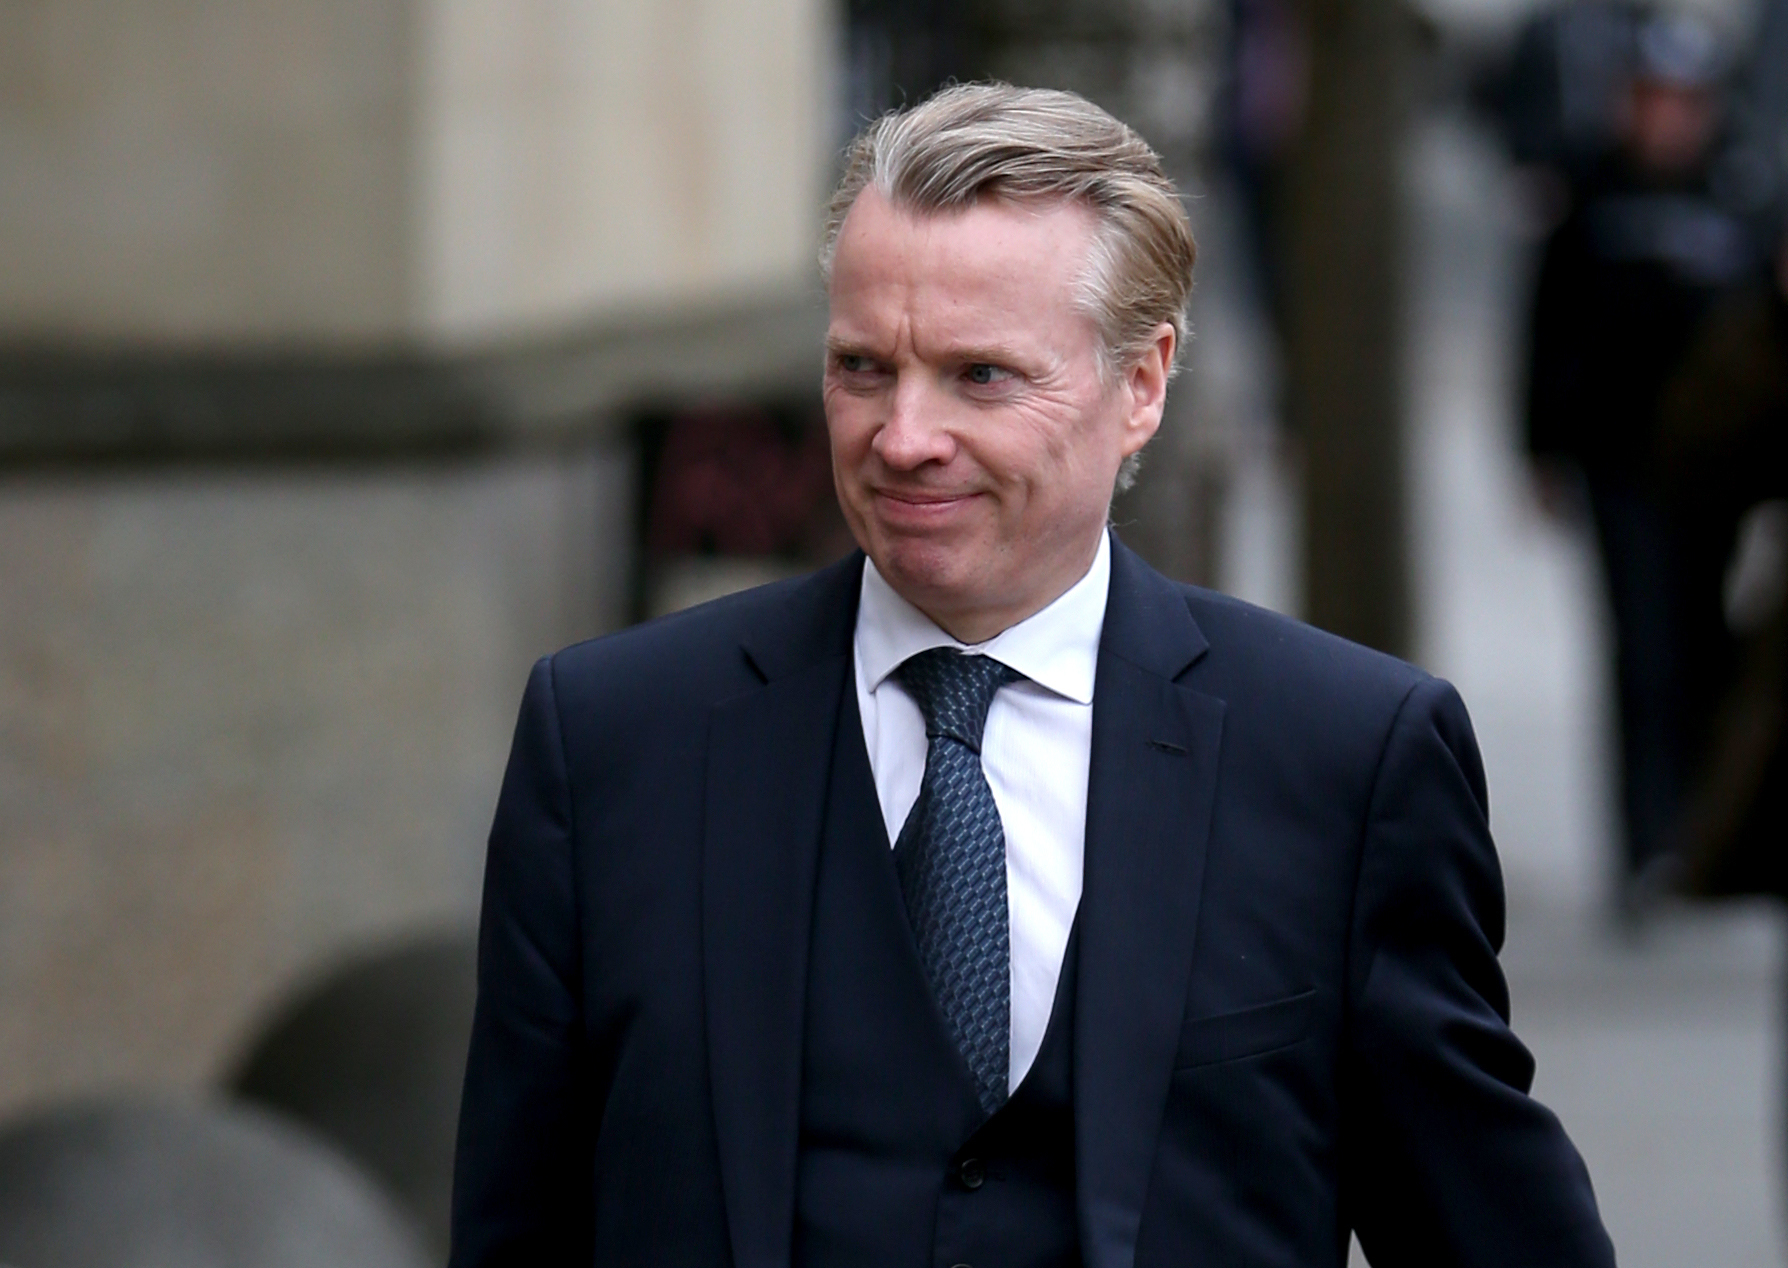 Former Rangers owner Craig Whyte has been cleared of fraudulent takeover of Rangers (Jane Barlow/PA Wire)